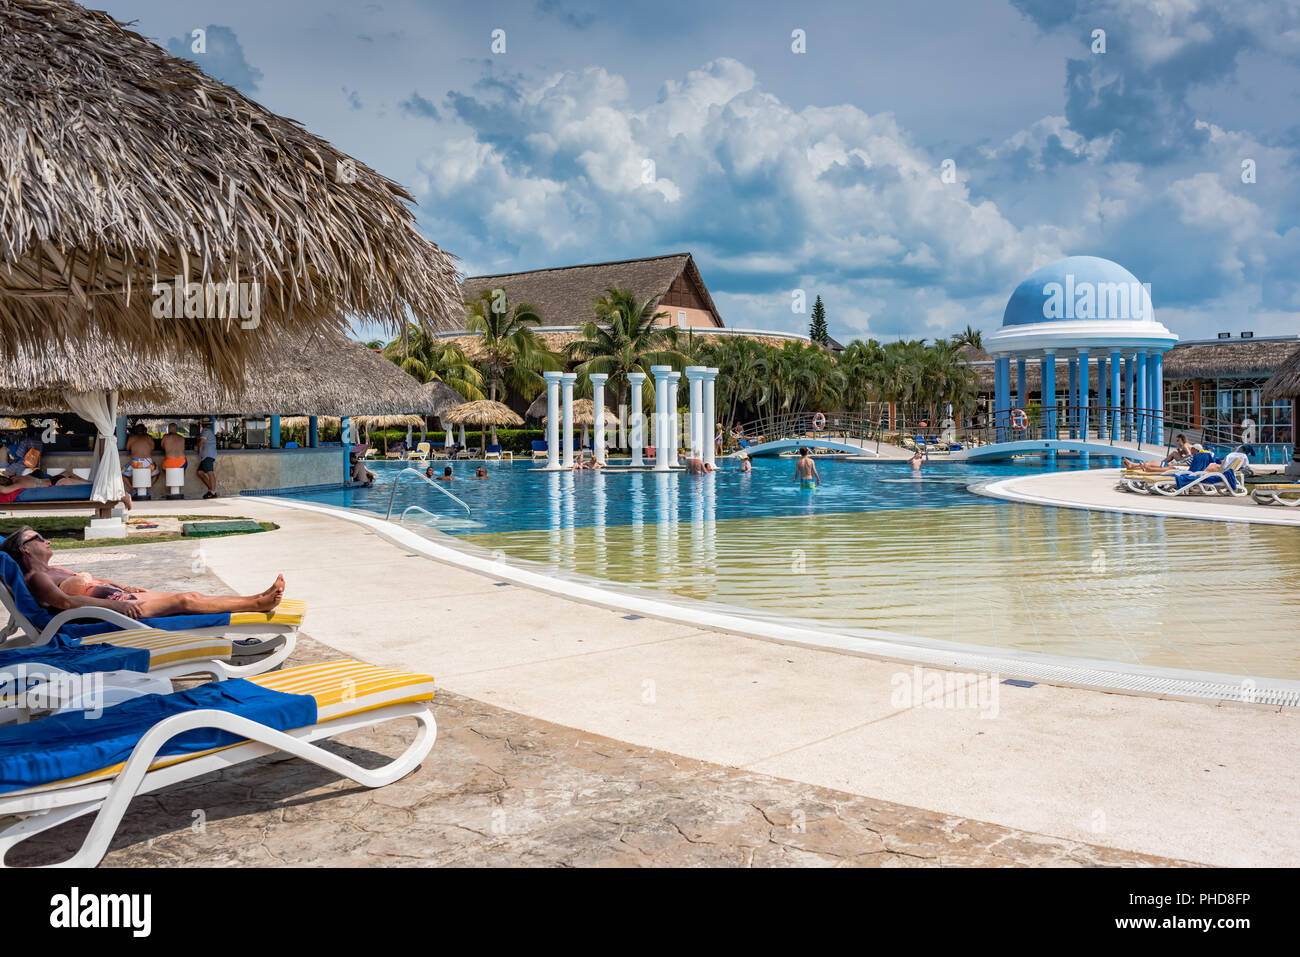 Varadero, Cuba / March 19, 2016:, 2016: Guests playing in and relaxing by the resort pool. Stock Photo